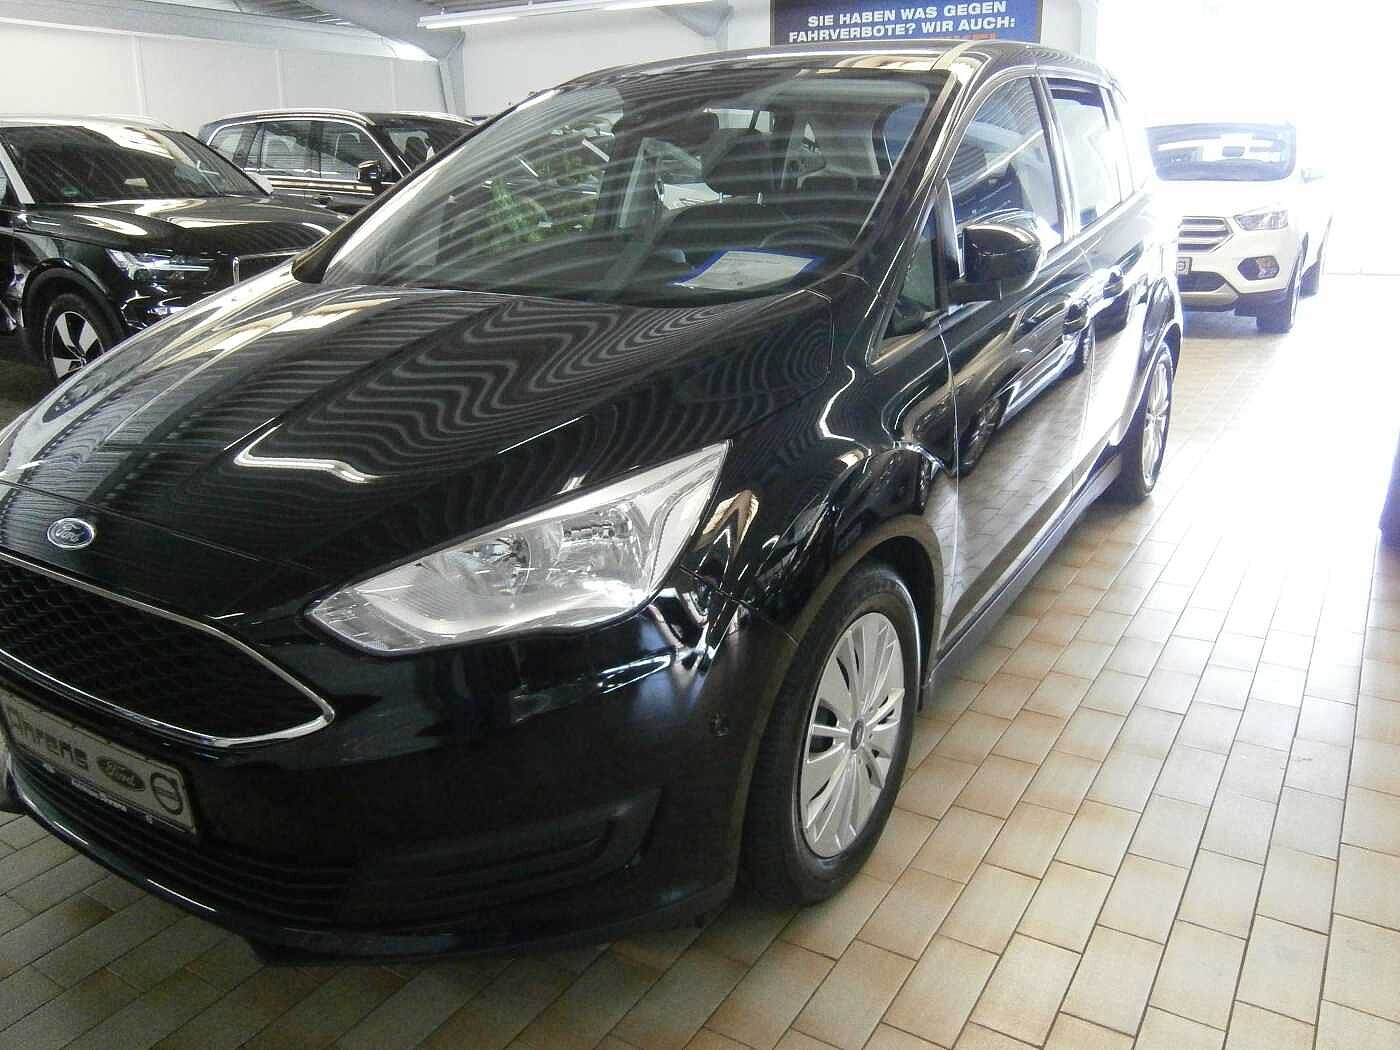 Ford Grand C Max Bei Autohaus Ahrens In Papenburg